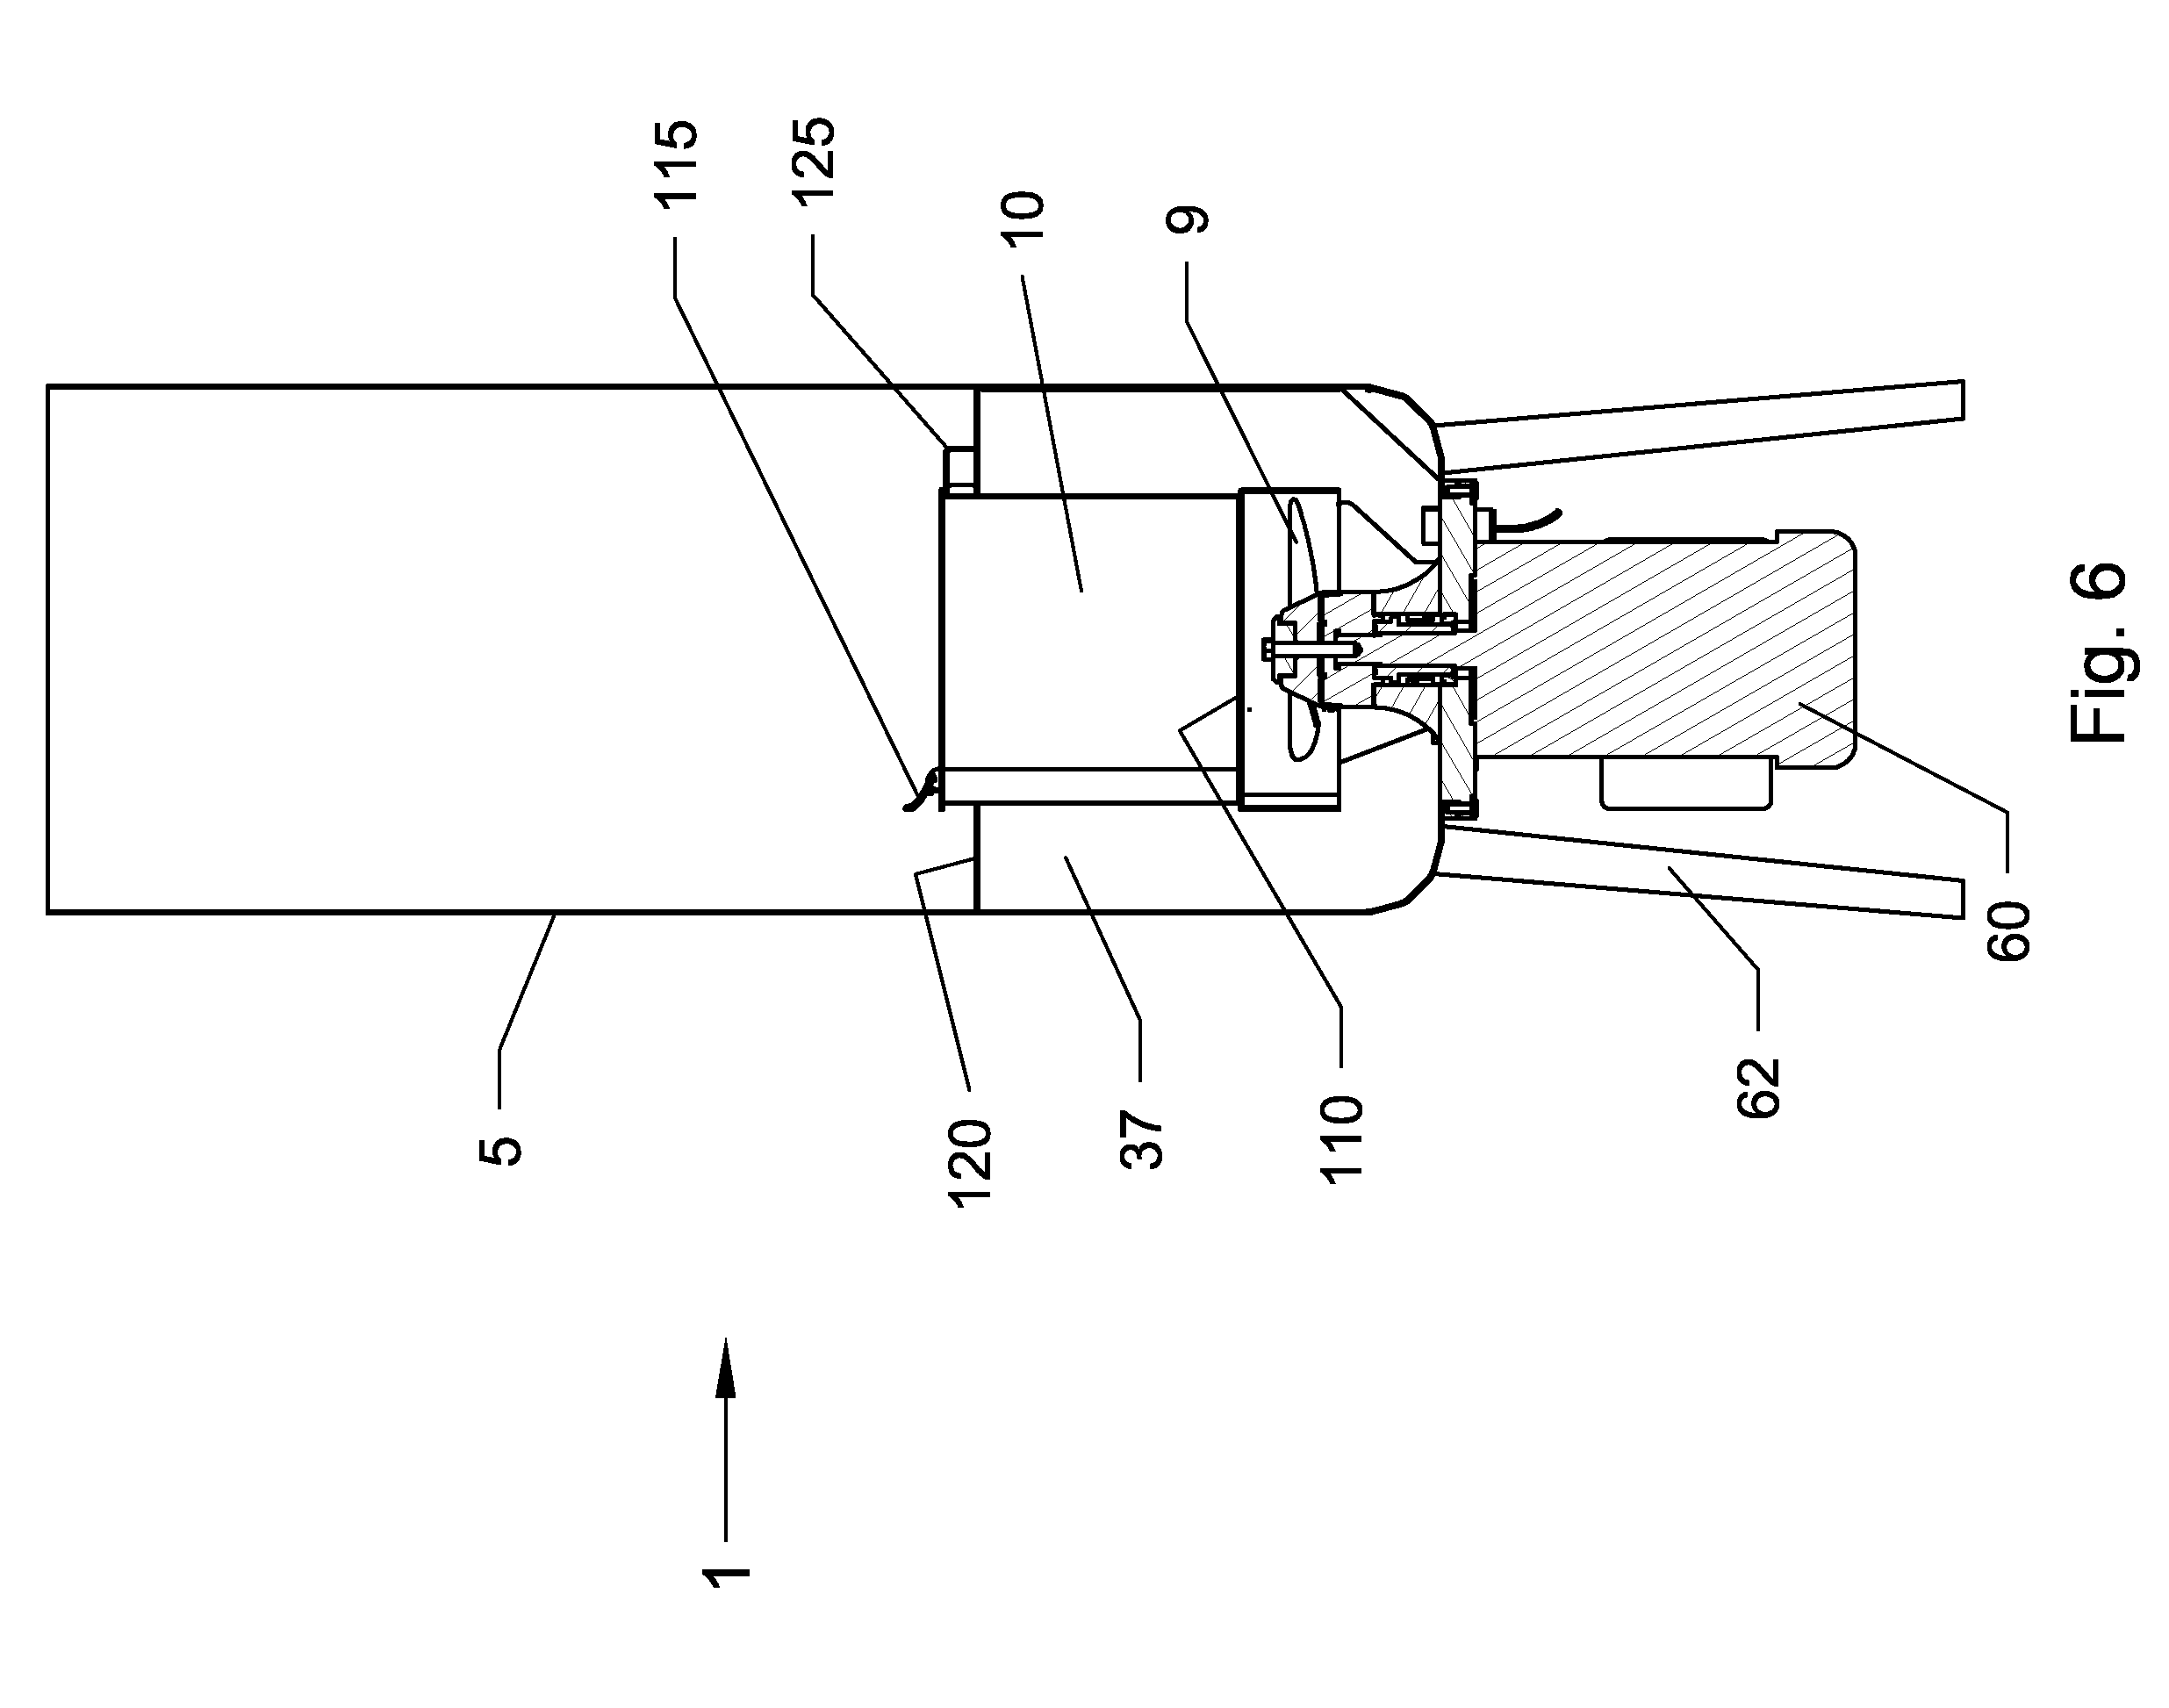 Silverware/flatware or parts washer apparatus and method thereof